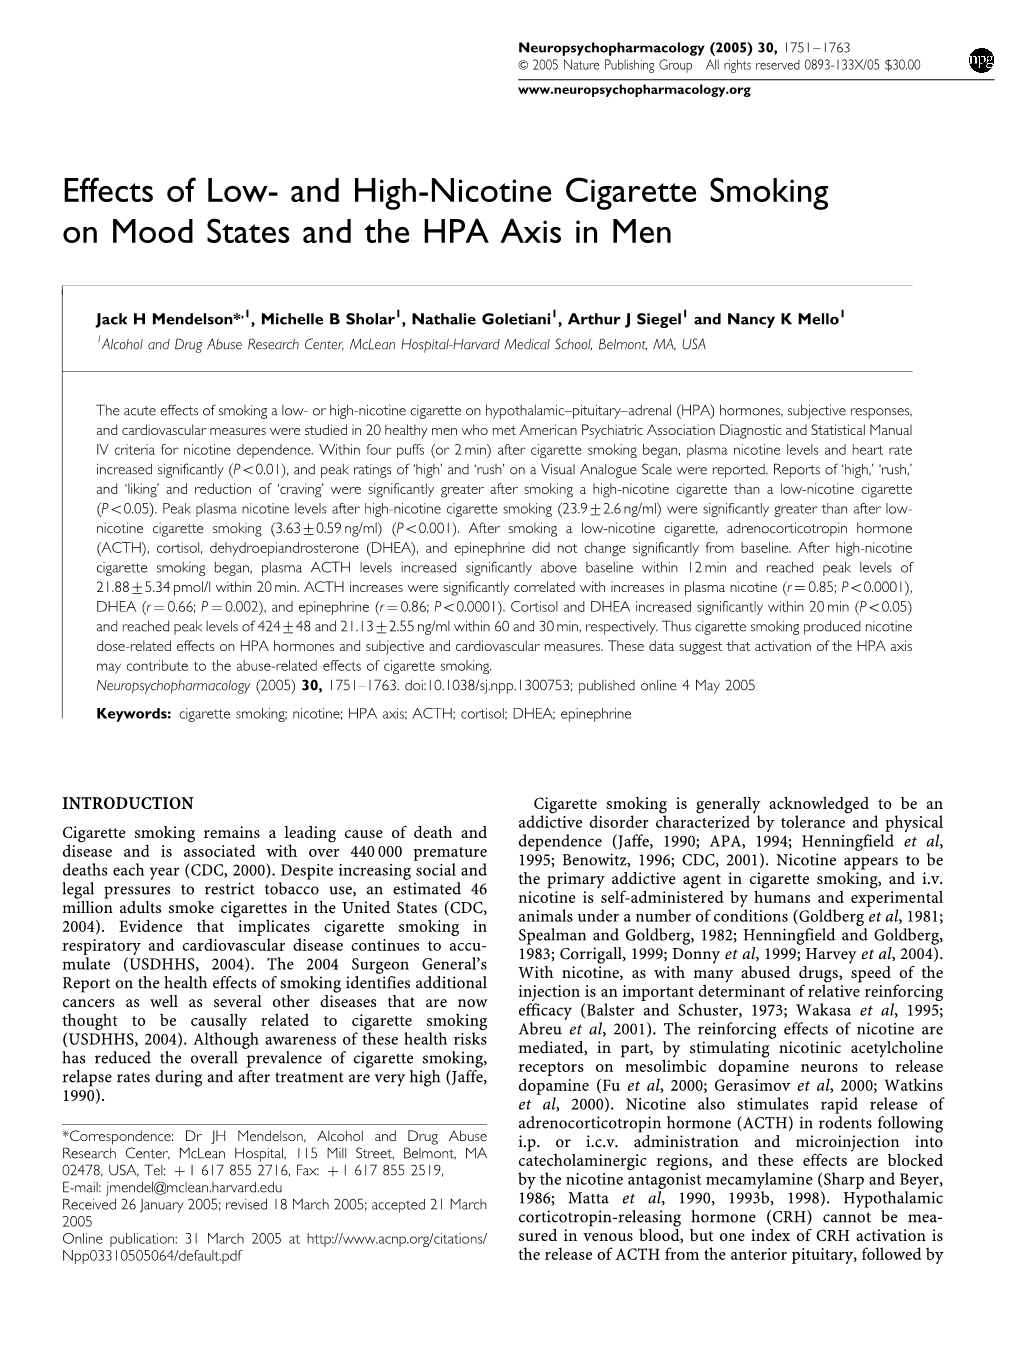 And High-Nicotine Cigarette Smoking on Mood States and the HPA Axis in Men